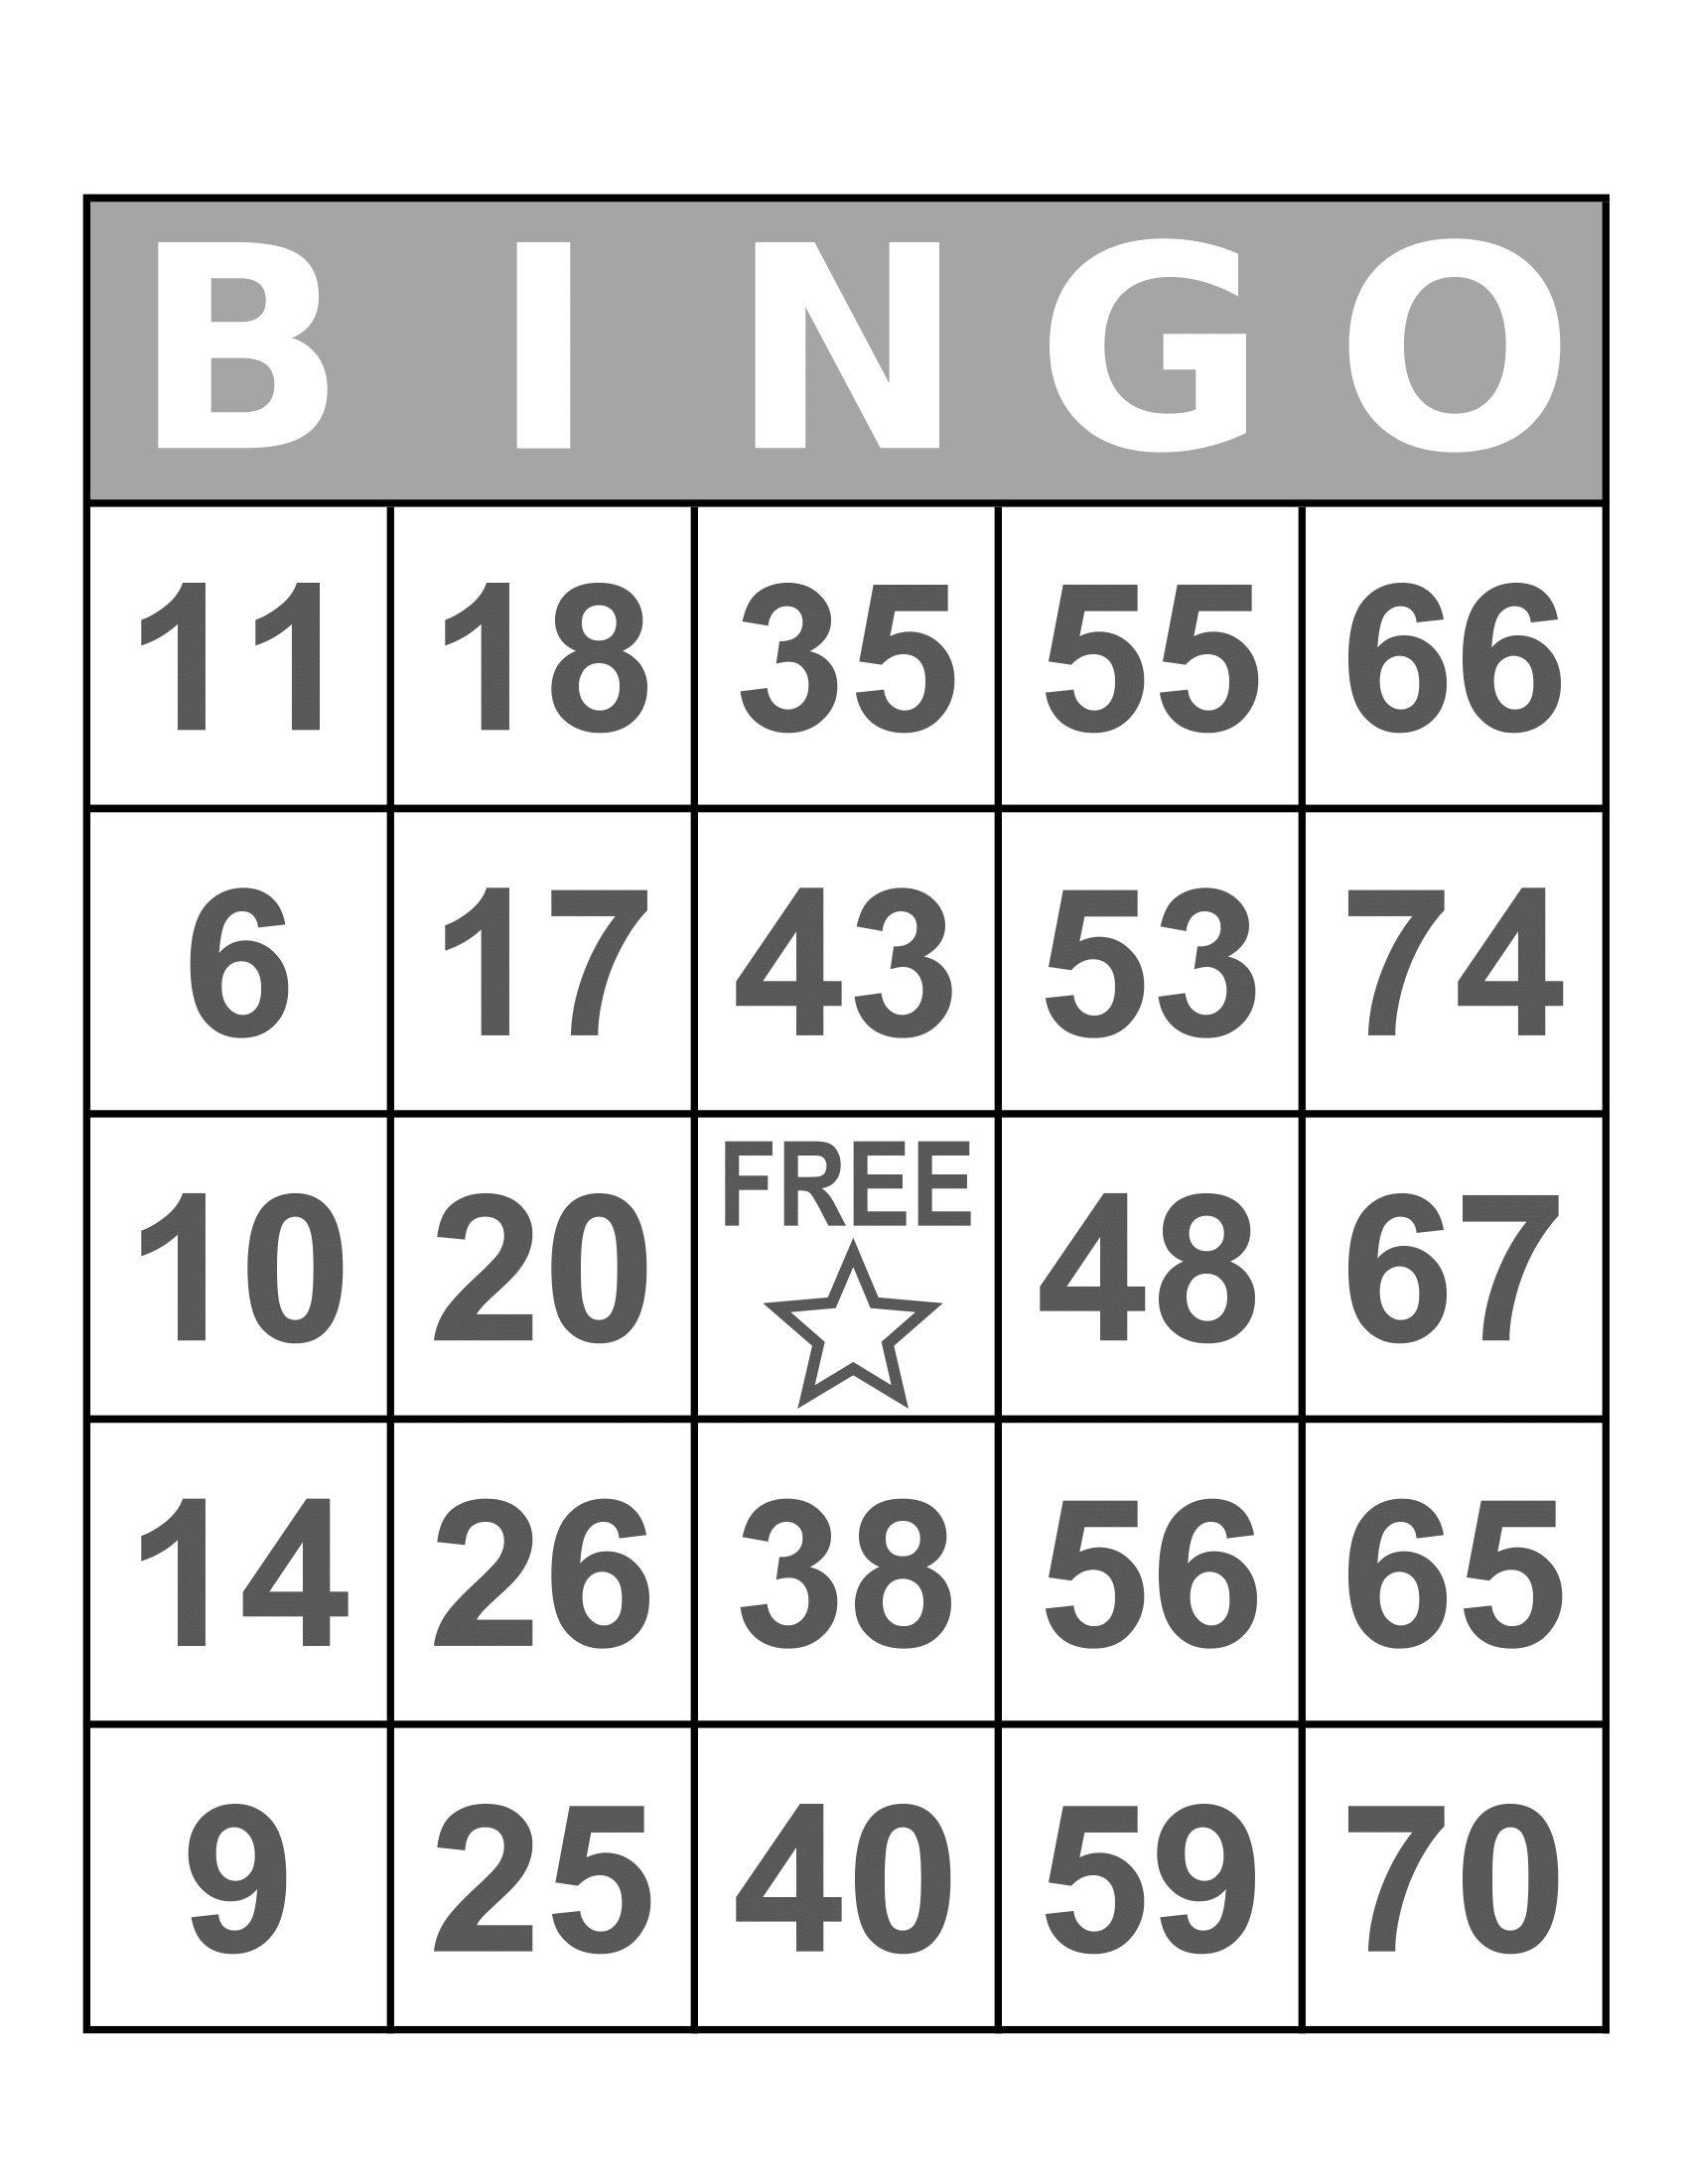 Bingo Cards 1000 Cards 1 Per Page Large Print Immediate Etsy In 2020 